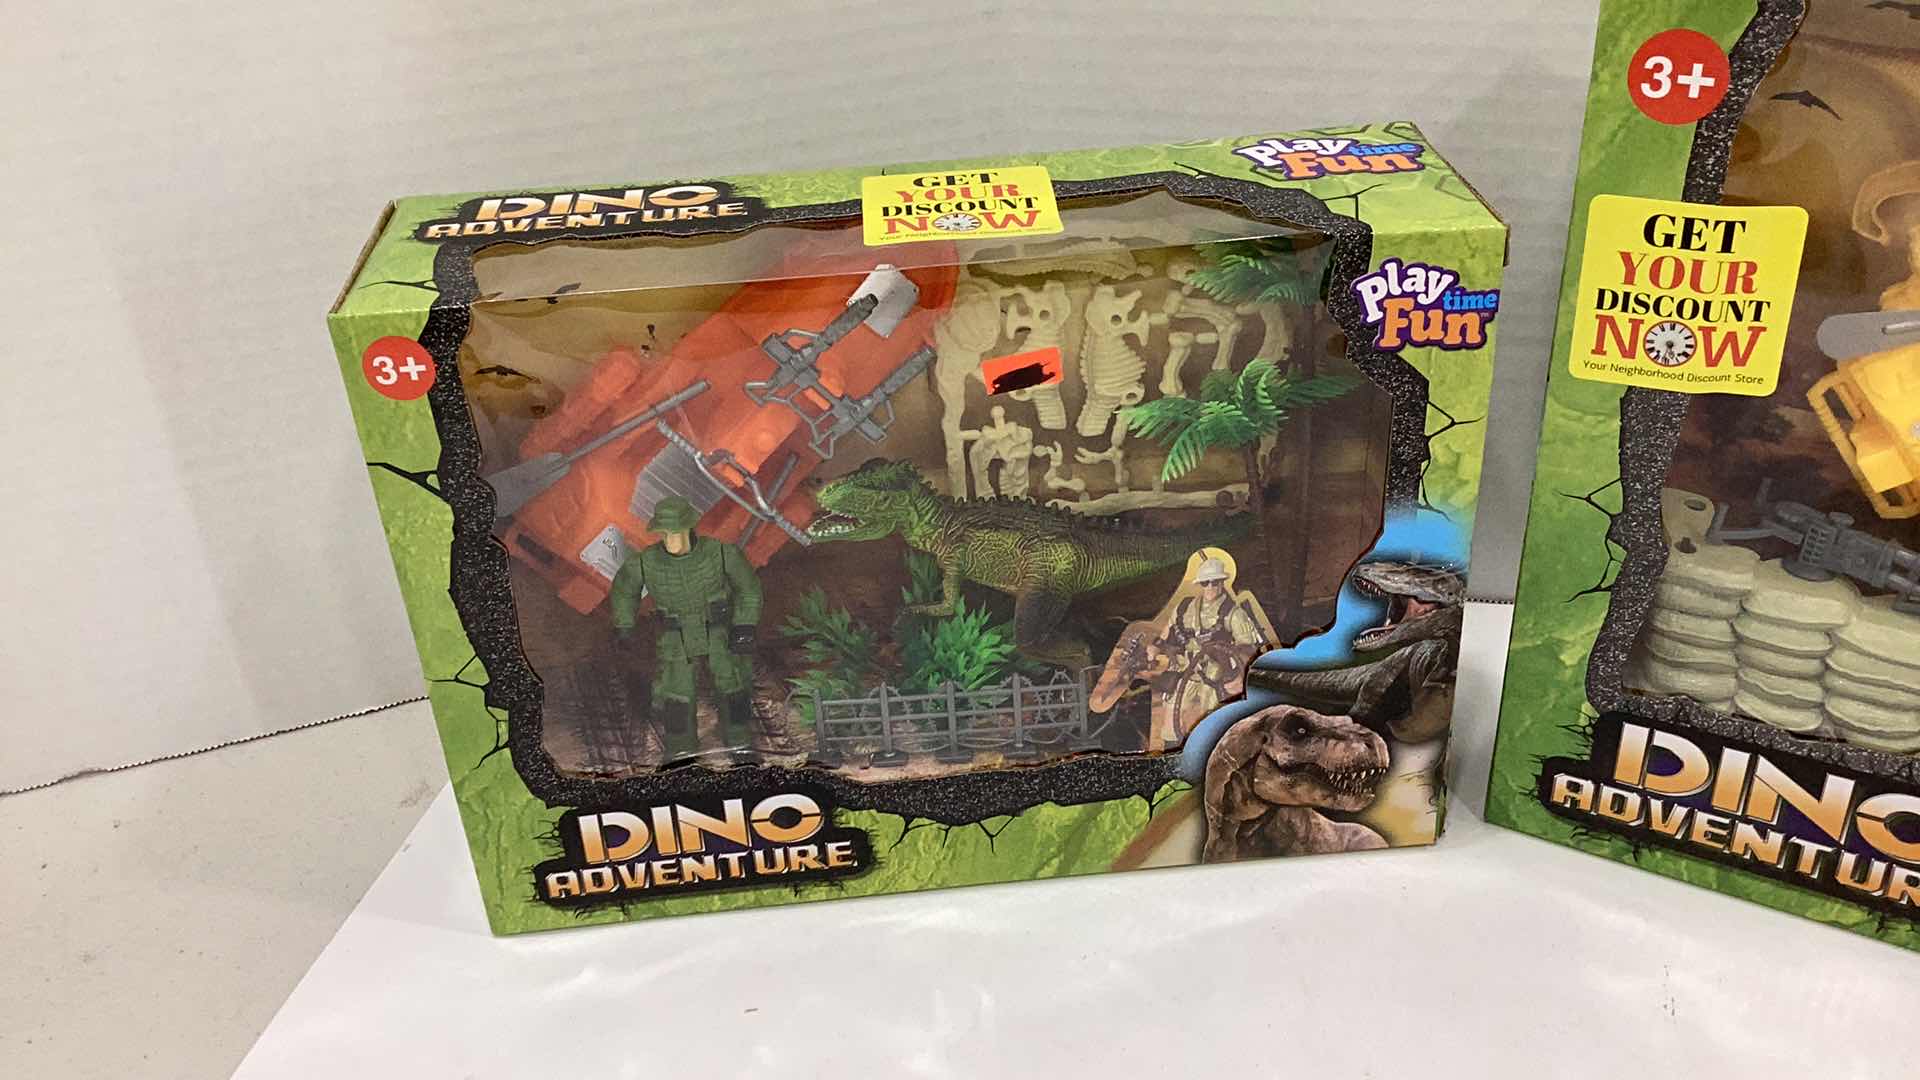 Photo 2 of 2 NEW DINO ADVENTURE TOY SETS